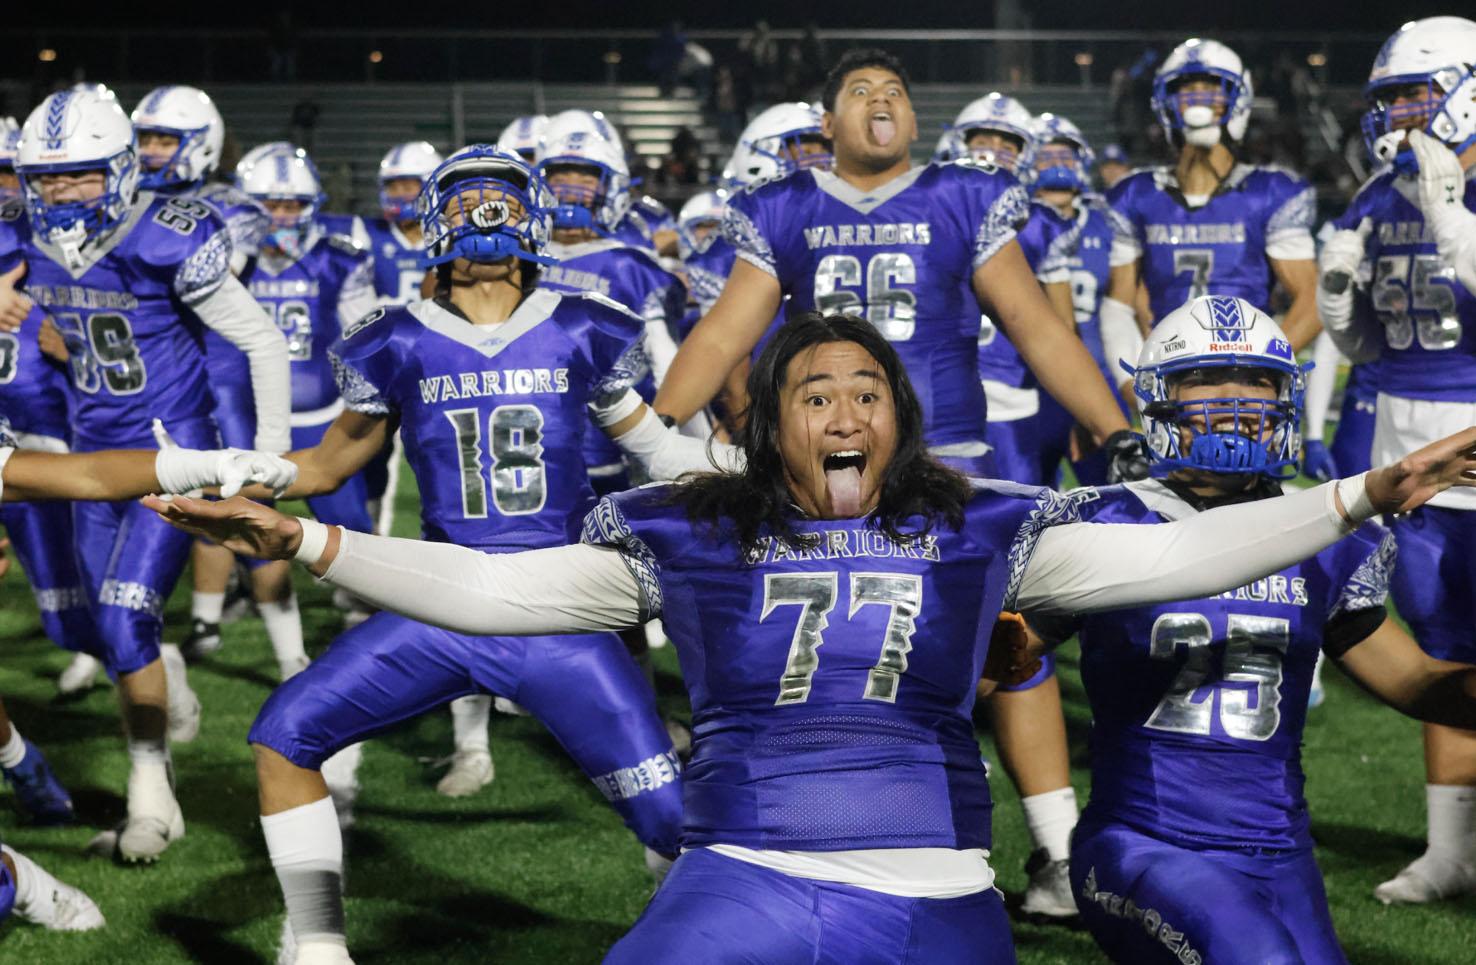 South City High defeated Santa Teresa High School 13-7 on November 25, 2023, to claim the CIF Central Coast Section Division 5 football championship. (Source: Jarrel Paloma)